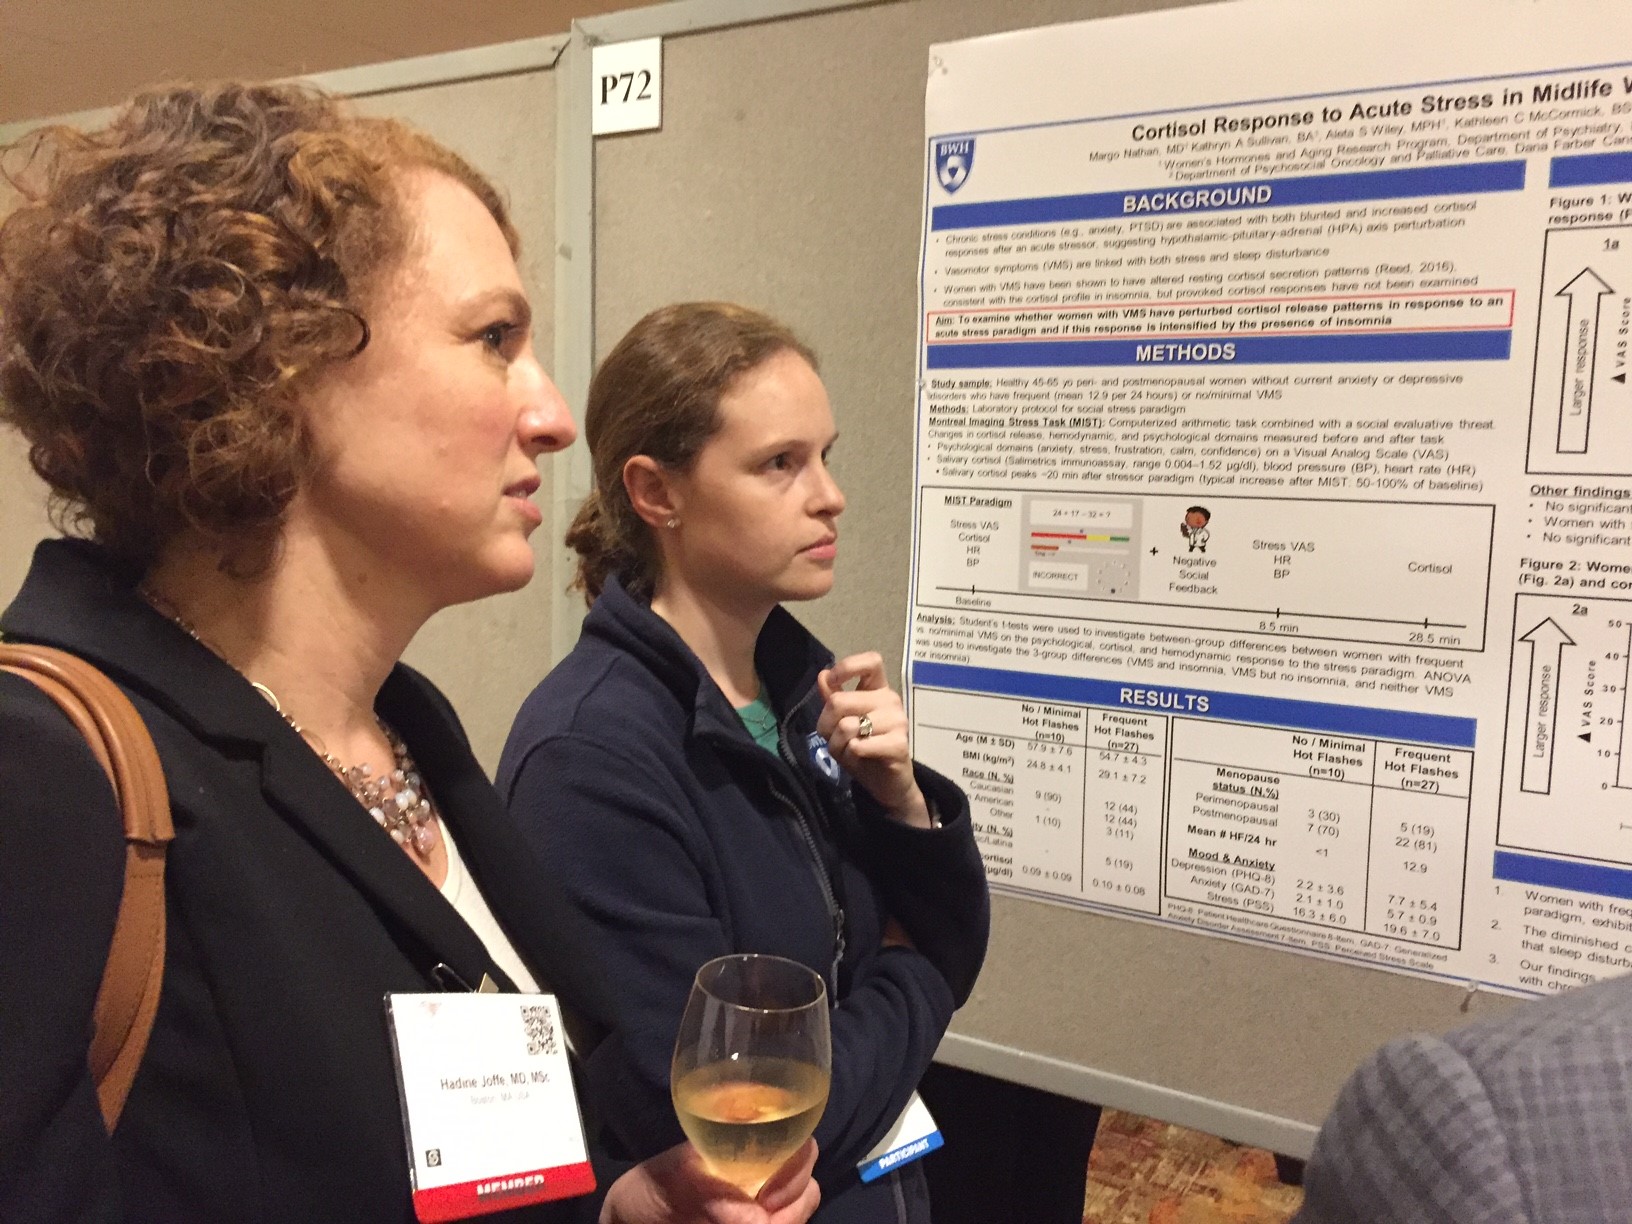 WHARP Presentation: Poster At 2017 Annual Meeting Of The North American Menopause Society